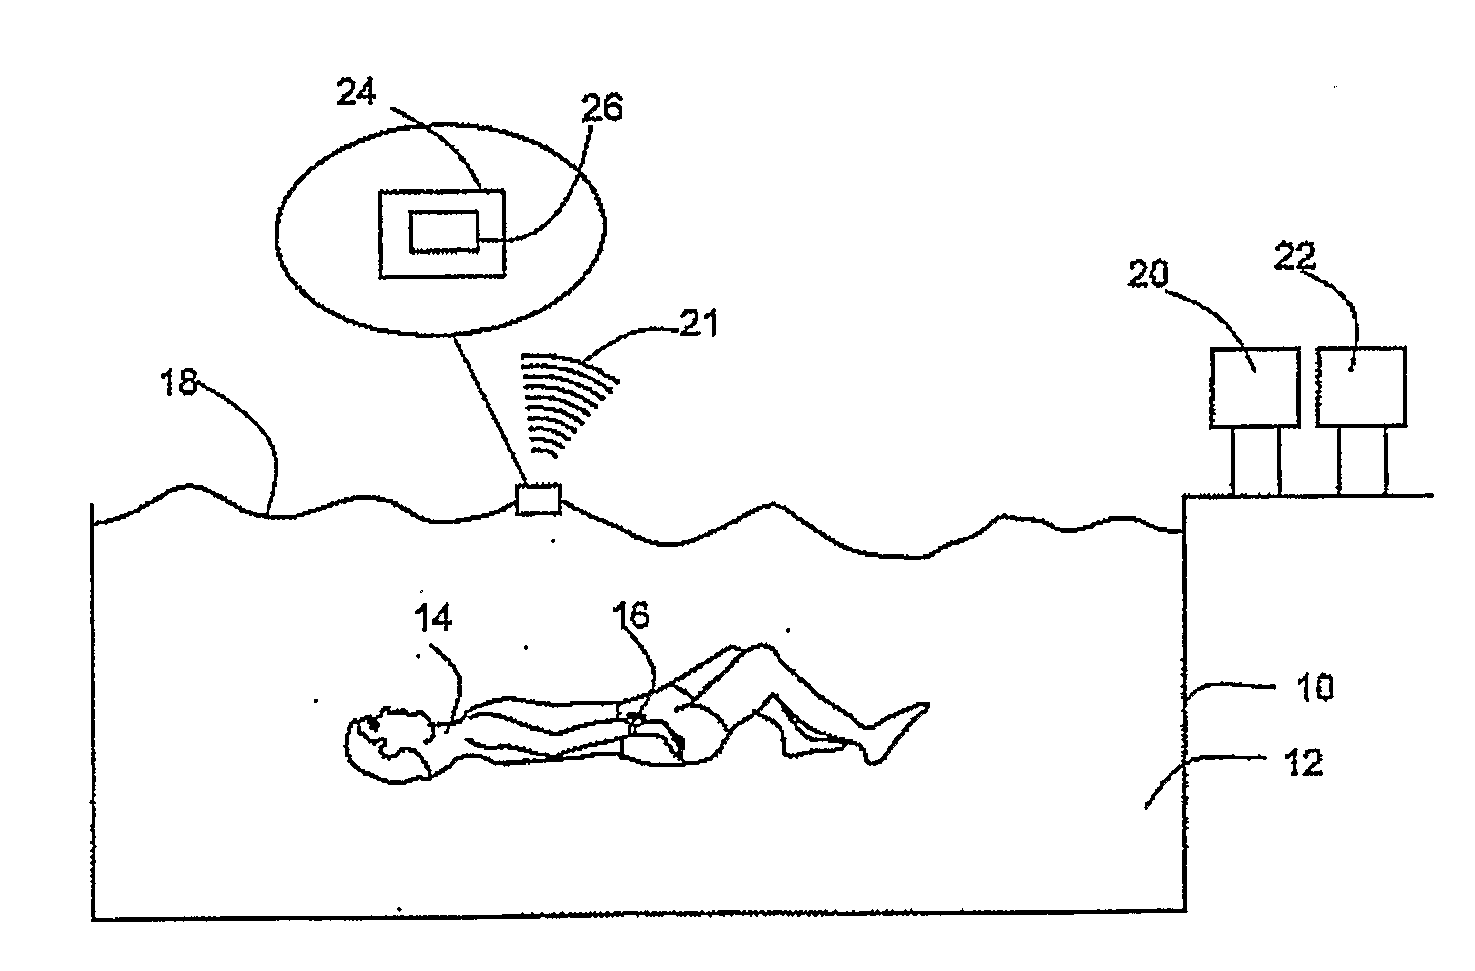 Apparatus and Method for The Detection of a Subject in Drowning or Near-Drowning Situation